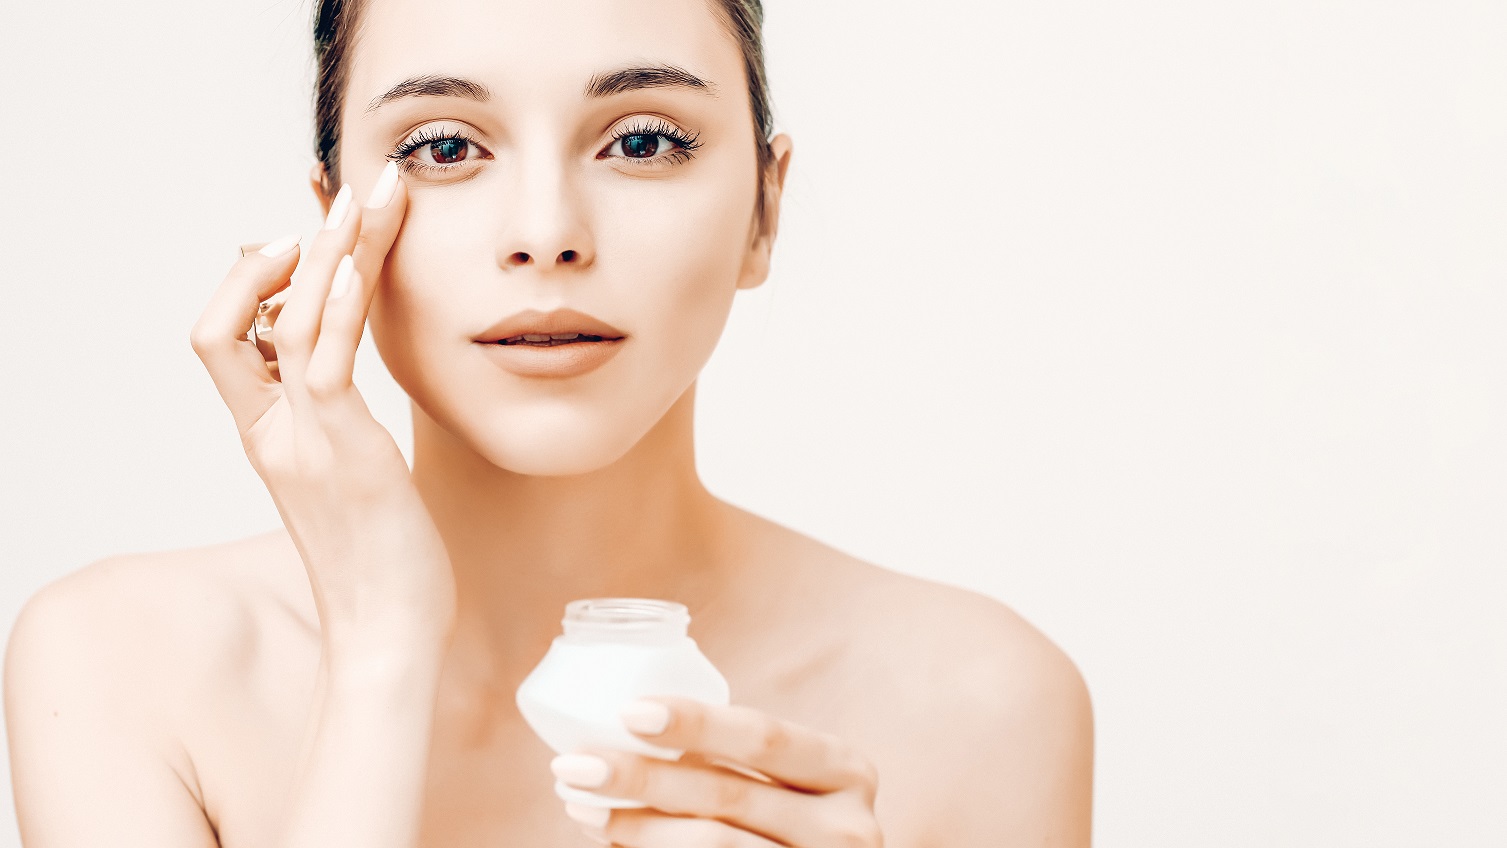 Natural beauty portrait of young woman applying cream on her face